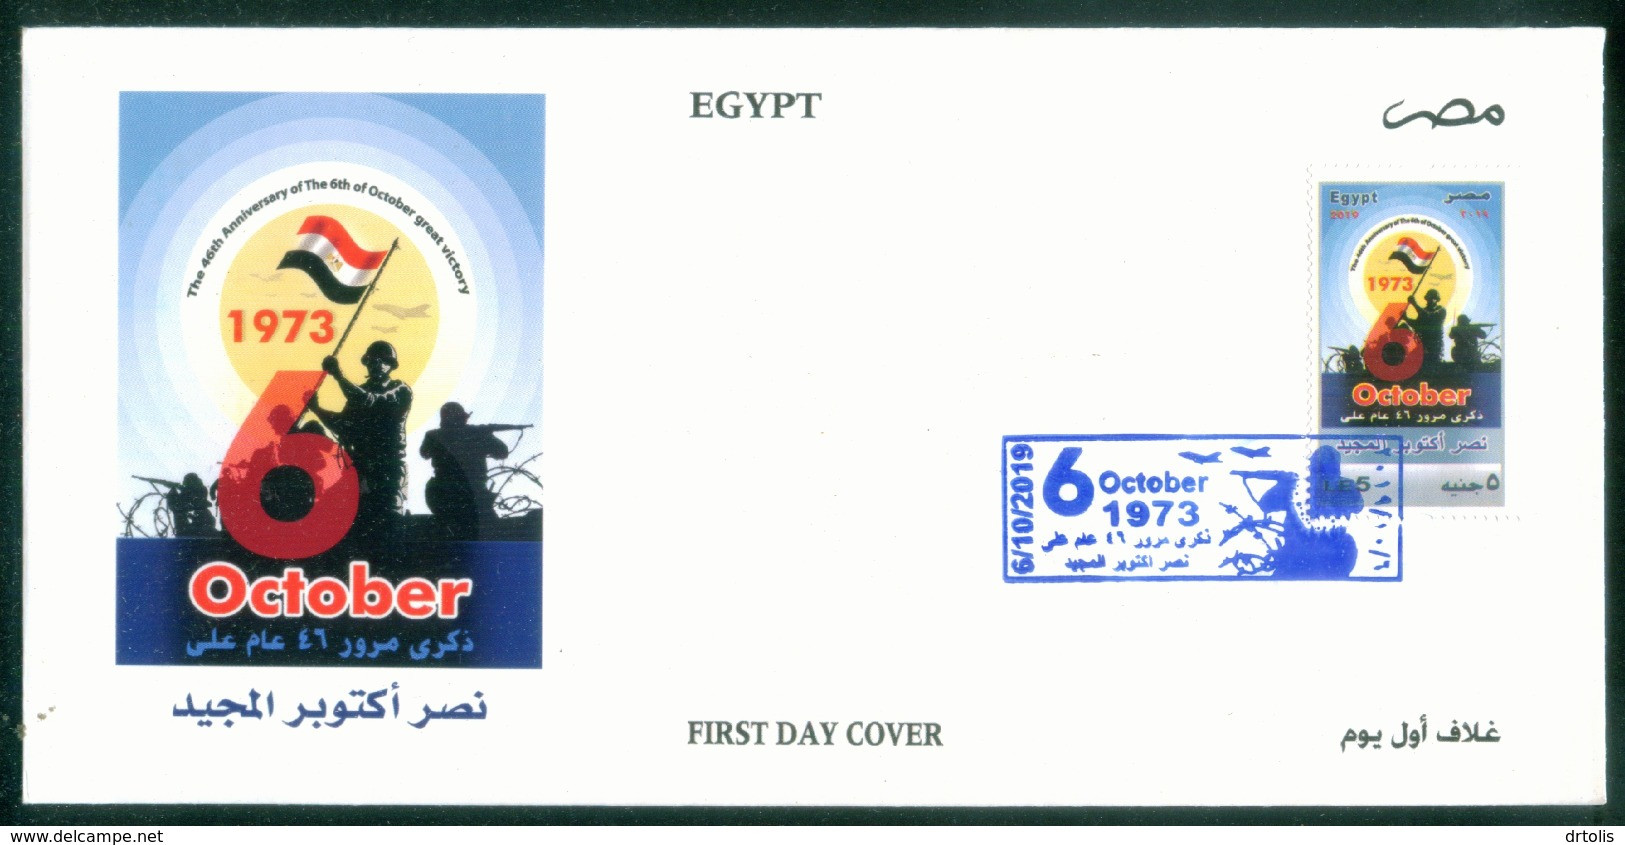 EGYPT / ISRAEL / 2019 / 6TH OCTOBER WAR / YOM KIPPUR / FLAG / SOLDIERS / GUNS / BARBED WIRE / FDC - Storia Postale